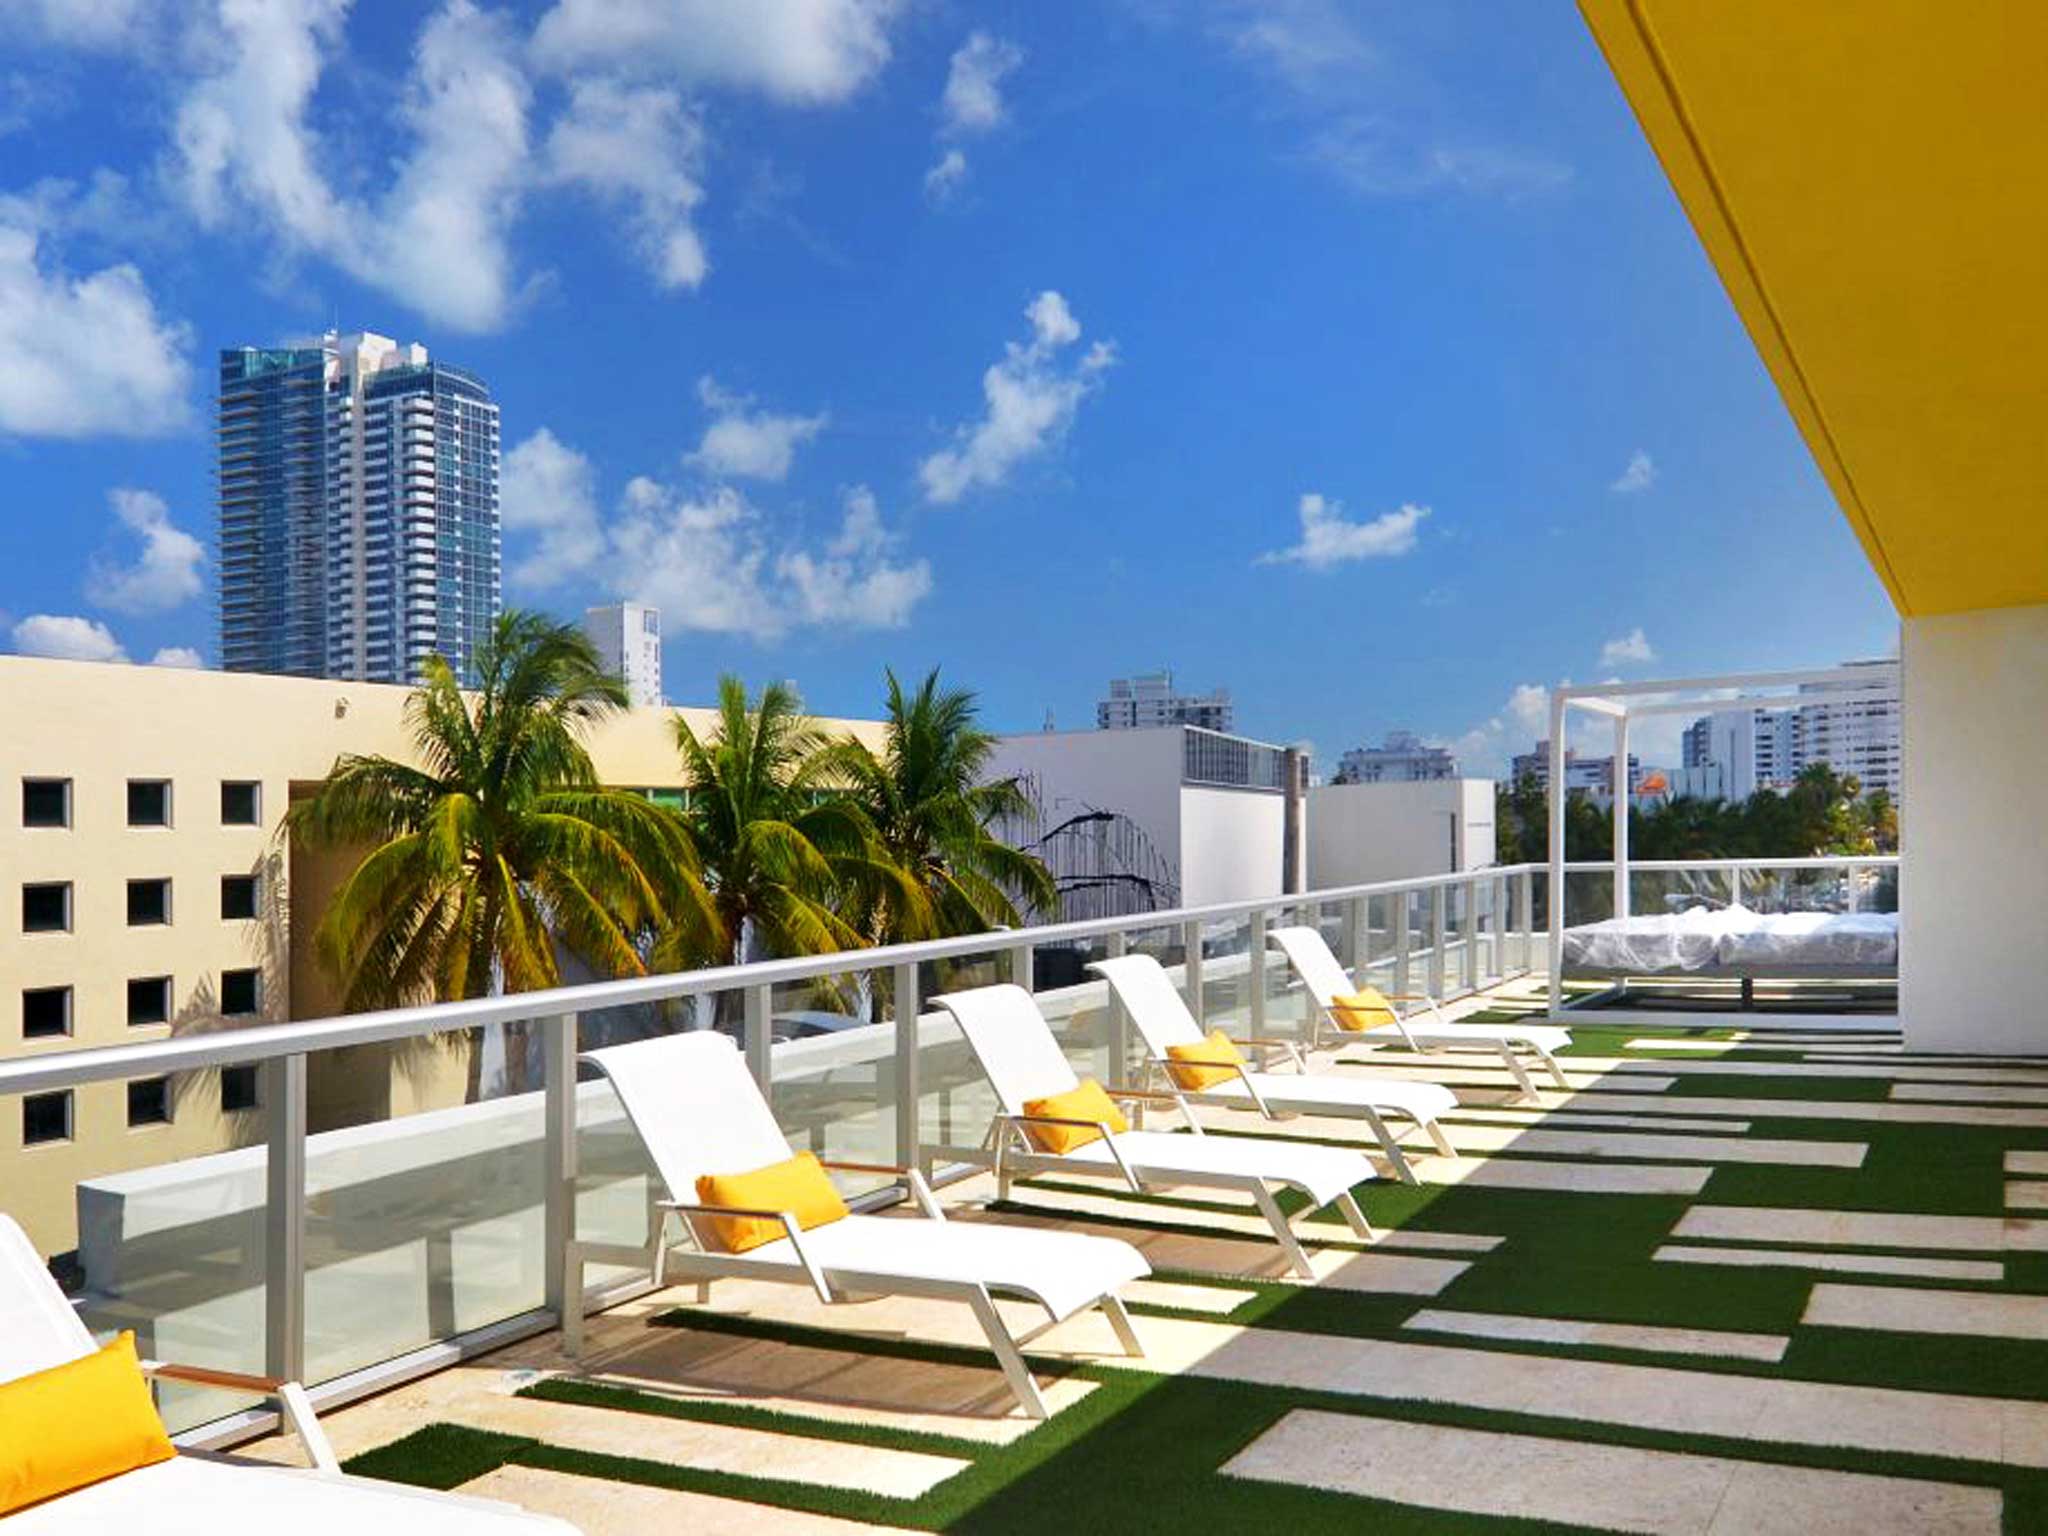 Vintro Hotel & Kitchen opens on Miami’s South
Beach on 1 August